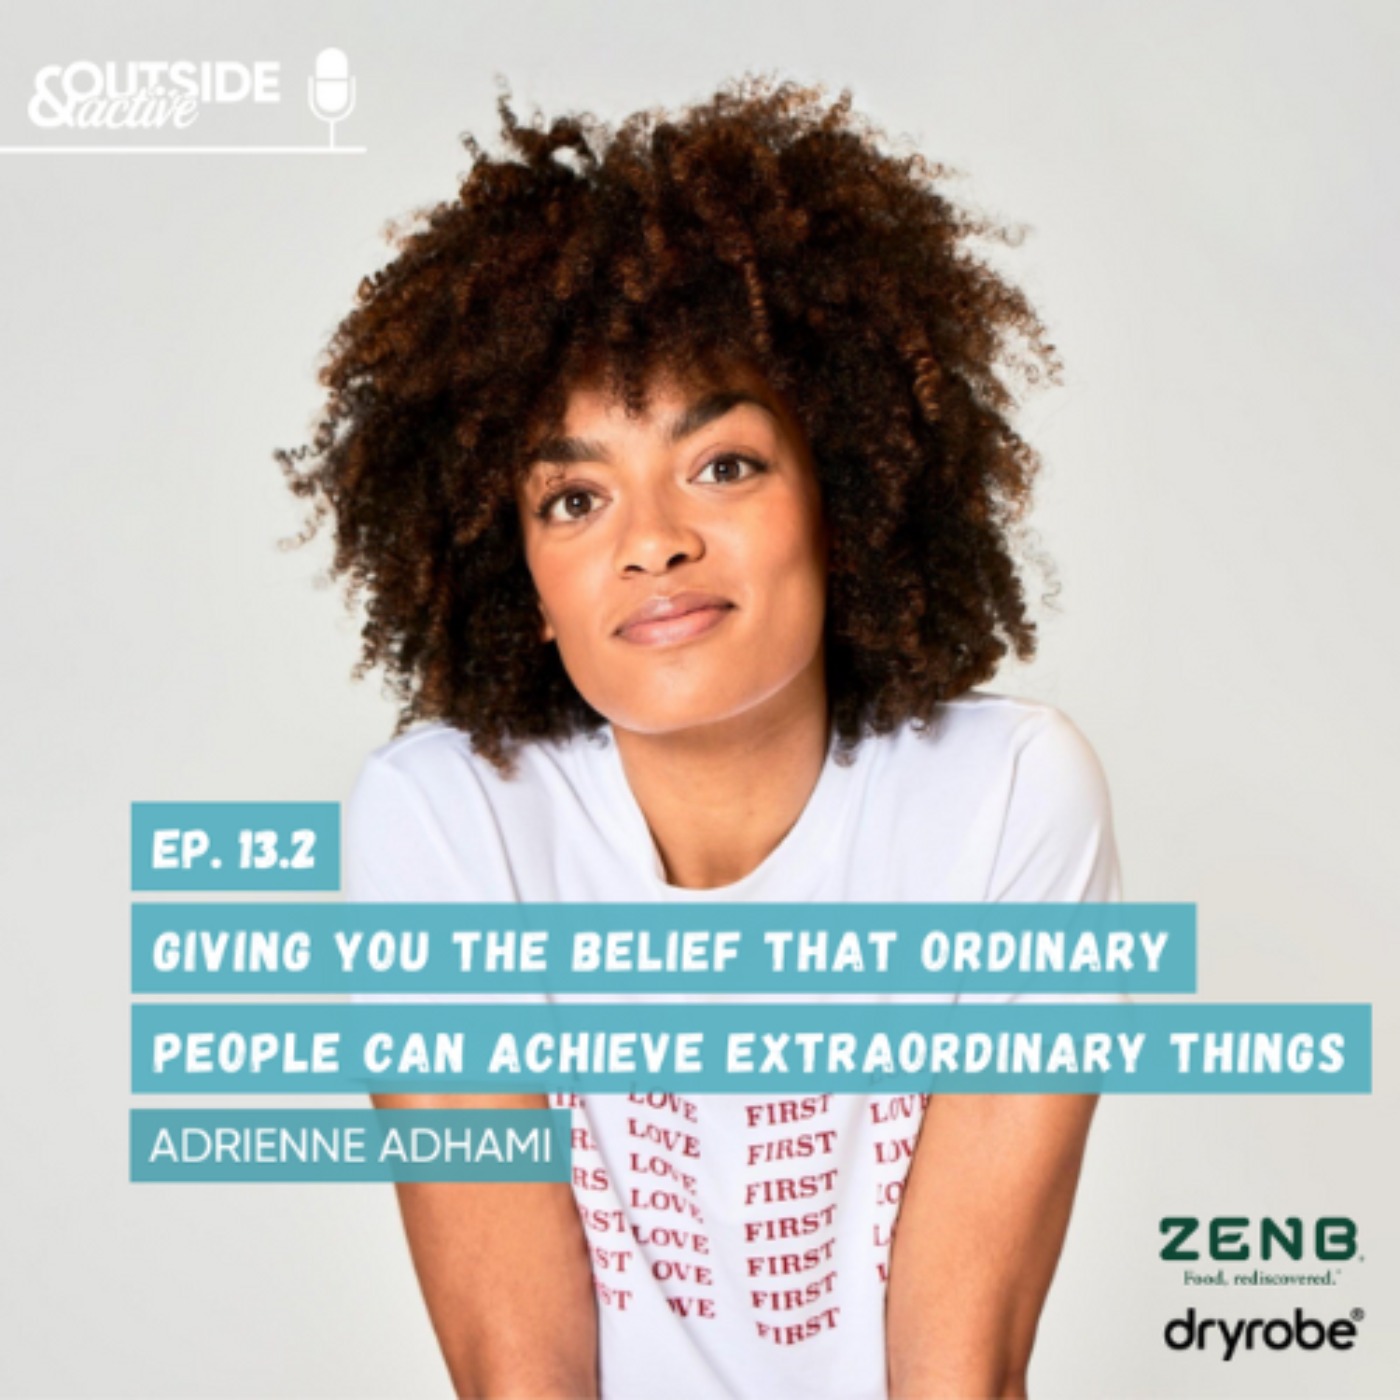 Adrienne Adhami - Giving you the belief that ordinary people can achieve extraordinary things